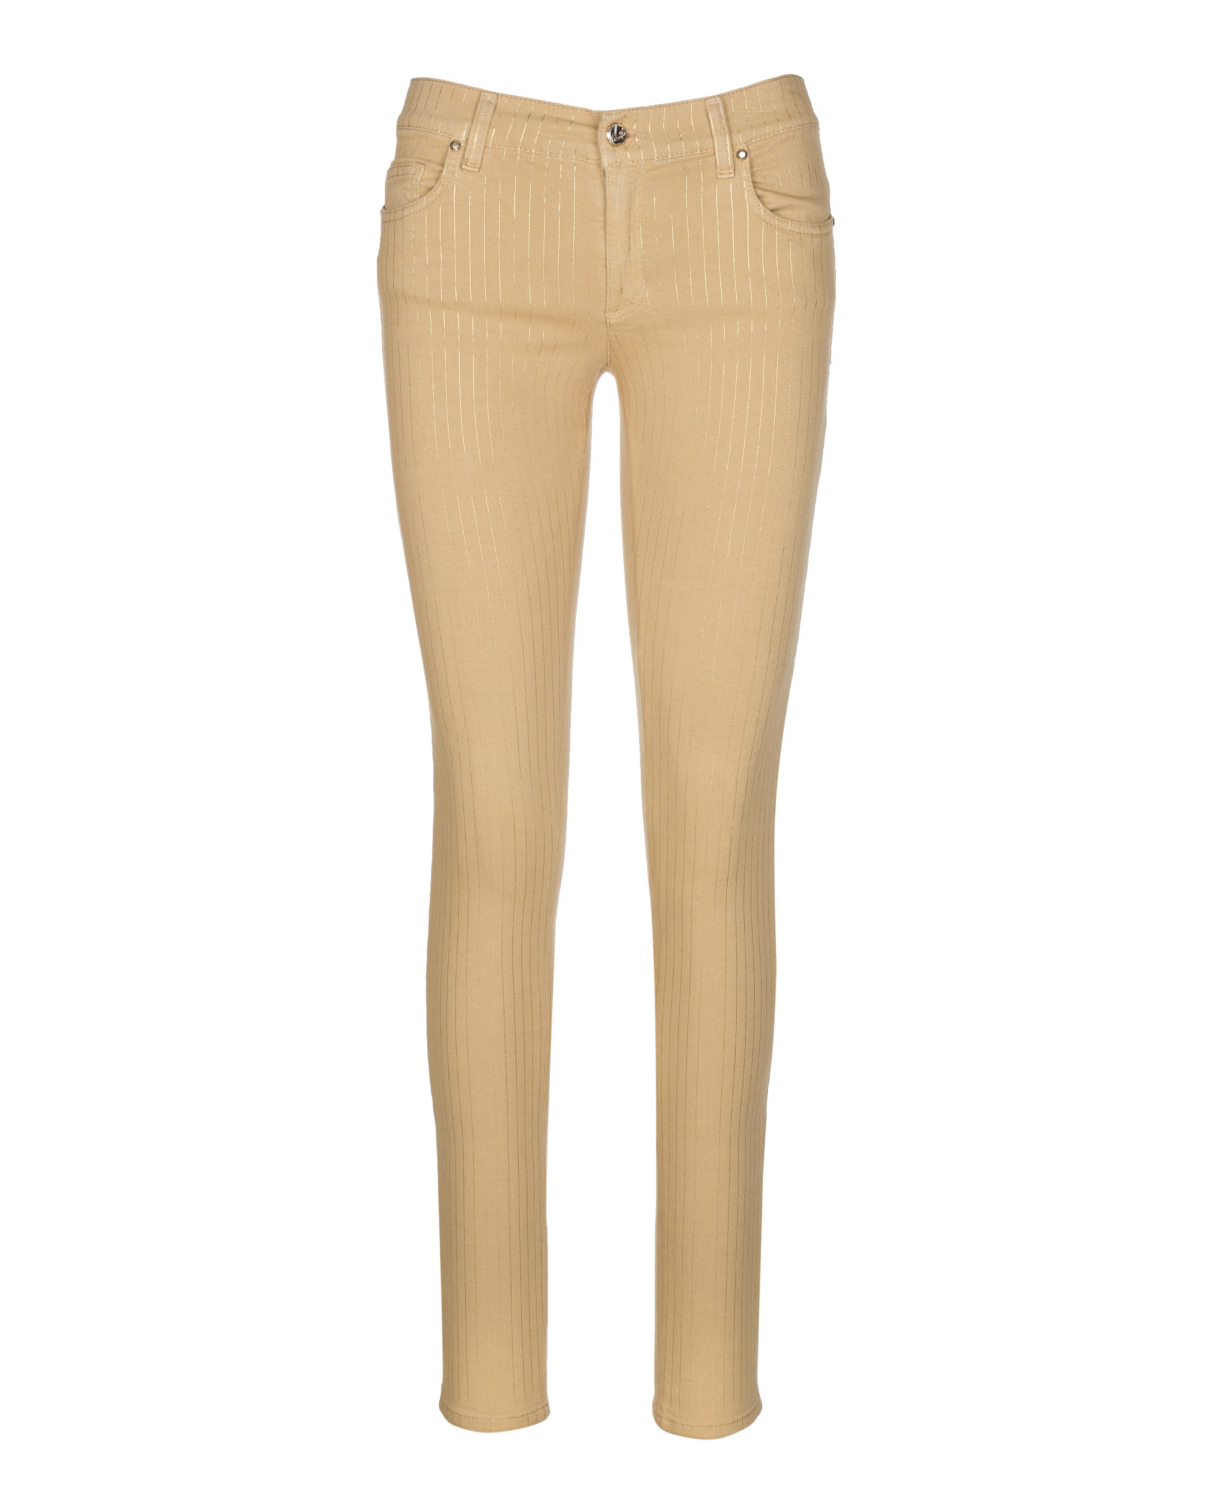 www.couturepoint.com-versace-jeans-womens-beige-stretch-denim-skinny-fit-pants-jeans